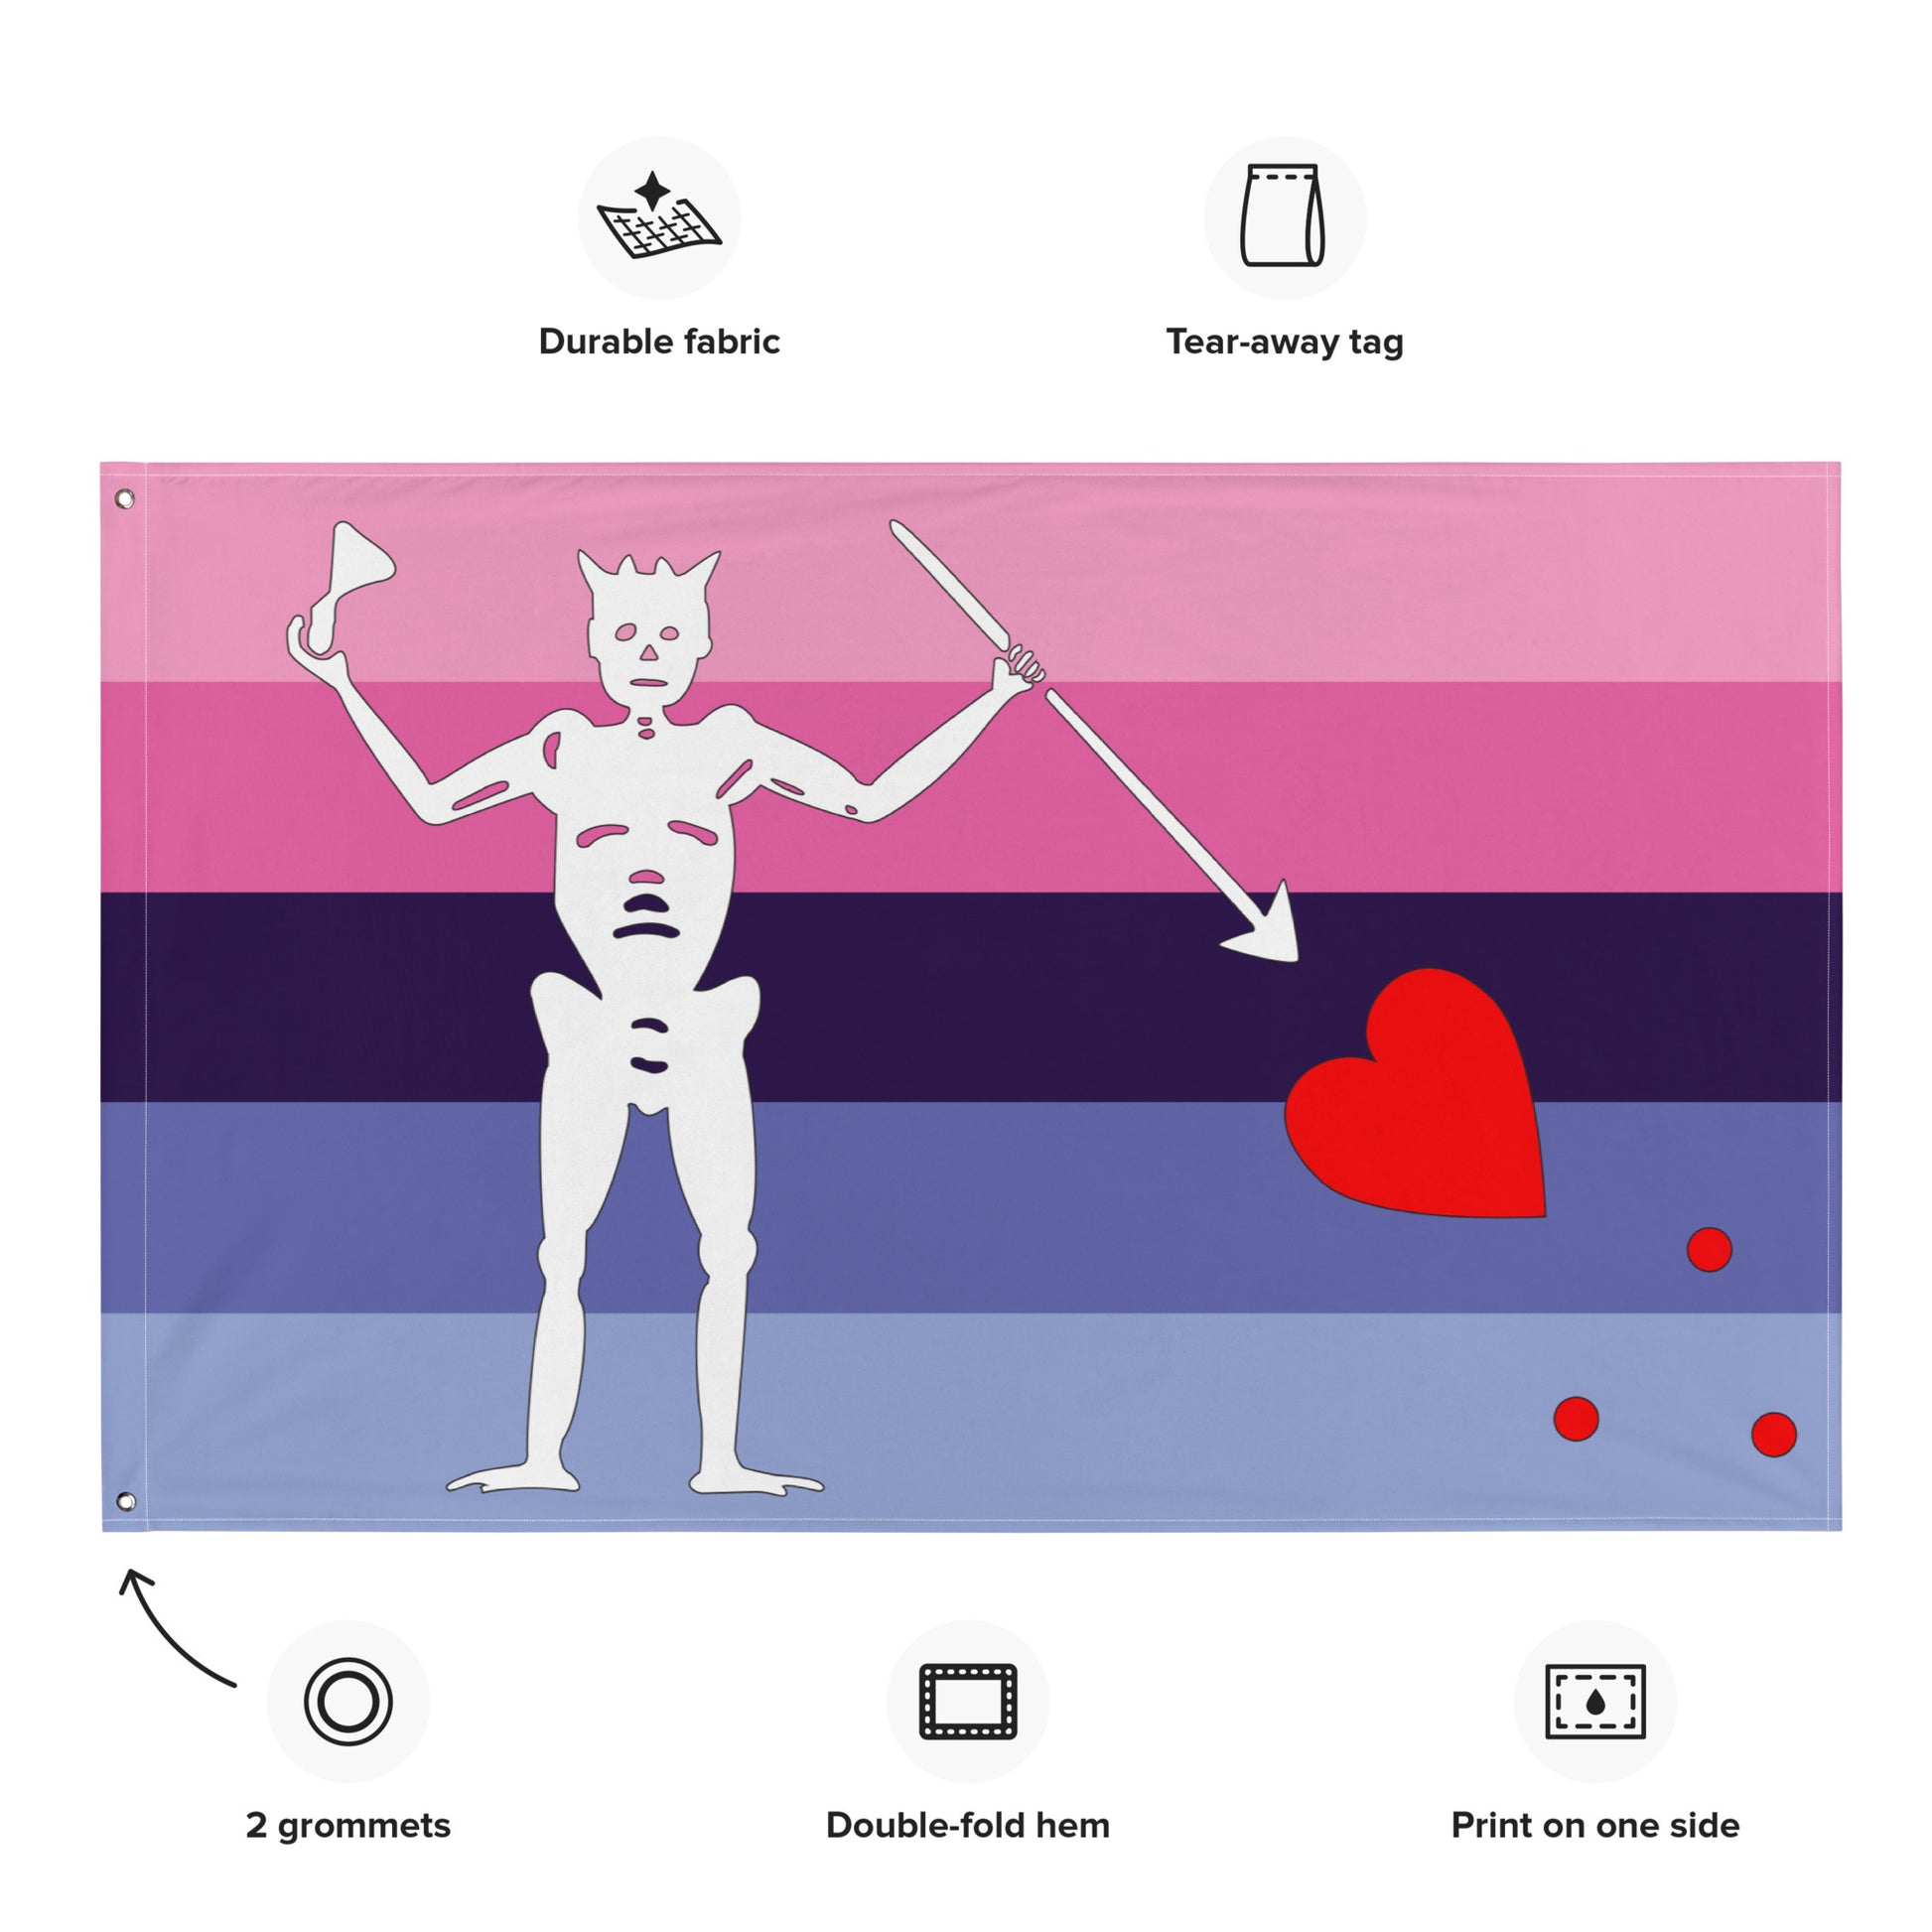 the omnisexual flag with blackbeard's symbol surrounded by the specifications of "durable fabric, tear-away tag, 2 grommets, double-fold hem, print on one side"